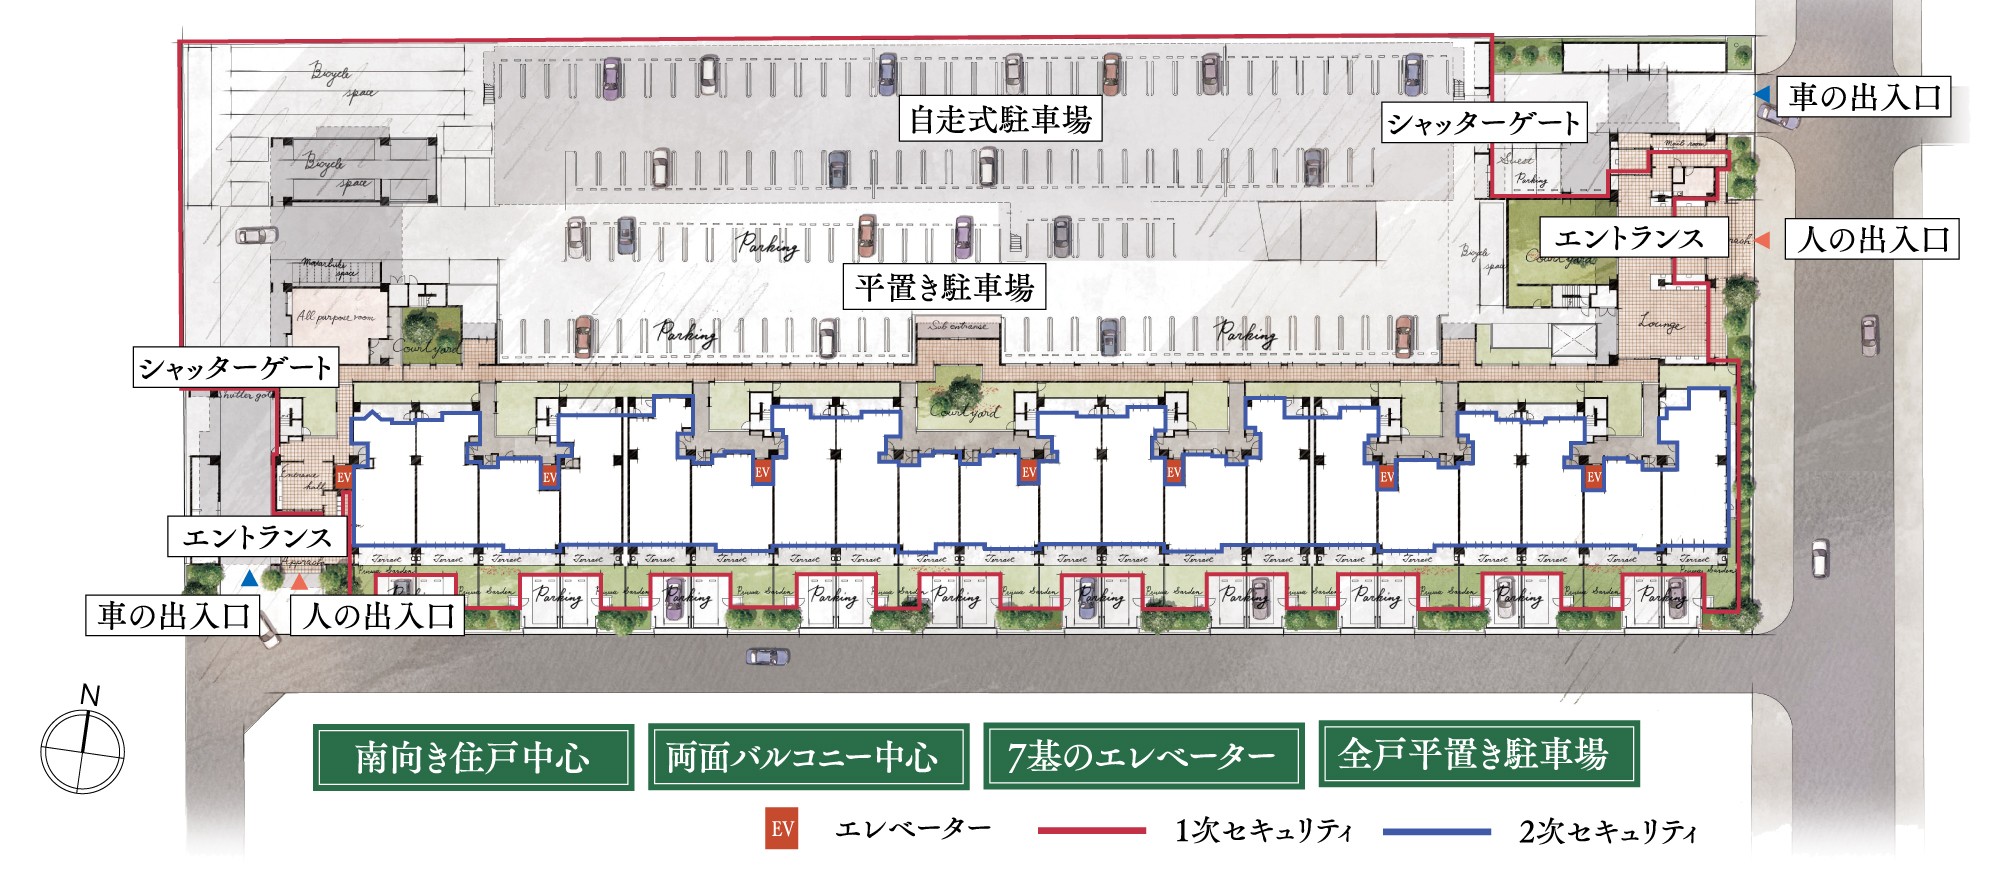 Lighting and convenience, Distribution building plan which is excellent in safety (site illustrations ・ 1-floor plan view / Which was raised drawn based on drawing, In fact a slightly different)